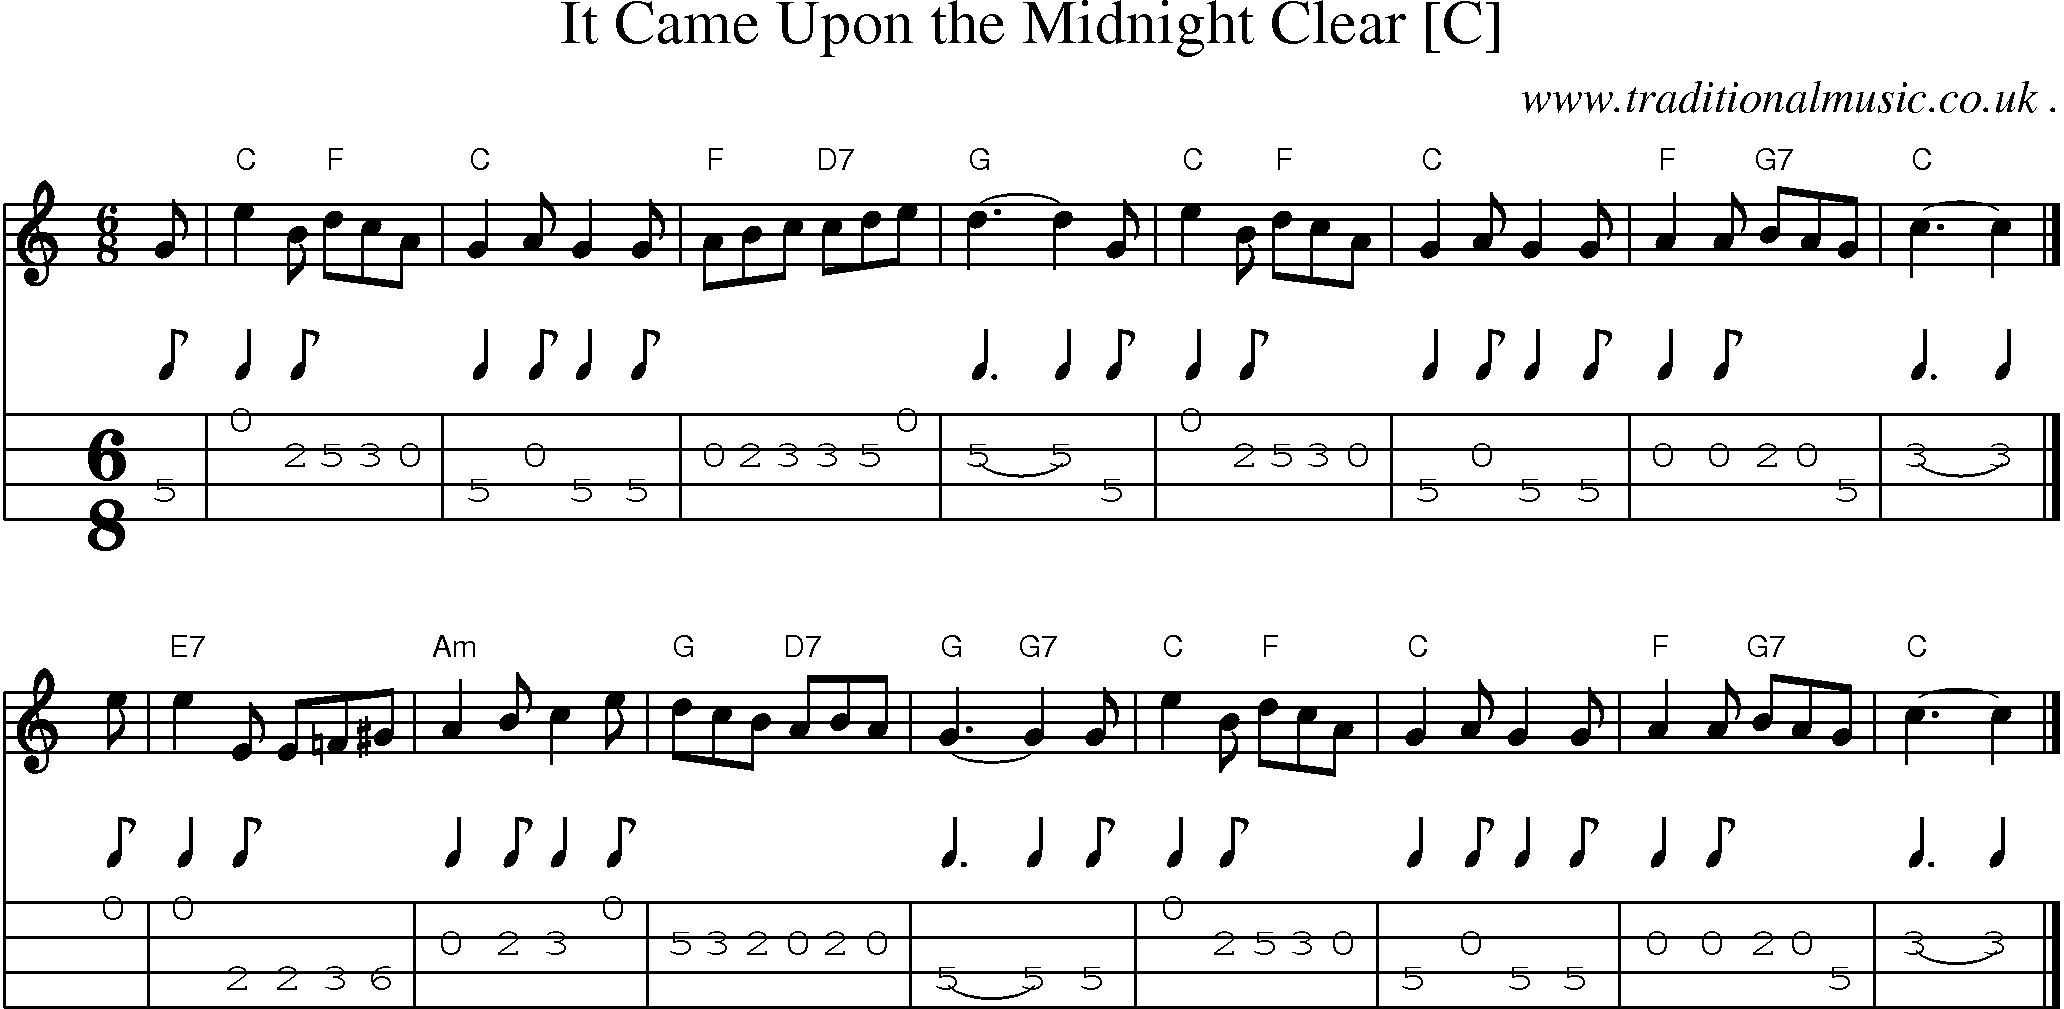 Sheet-music  score, Chords and Mandolin Tabs for It Came Upon The Midnight Clear [c]